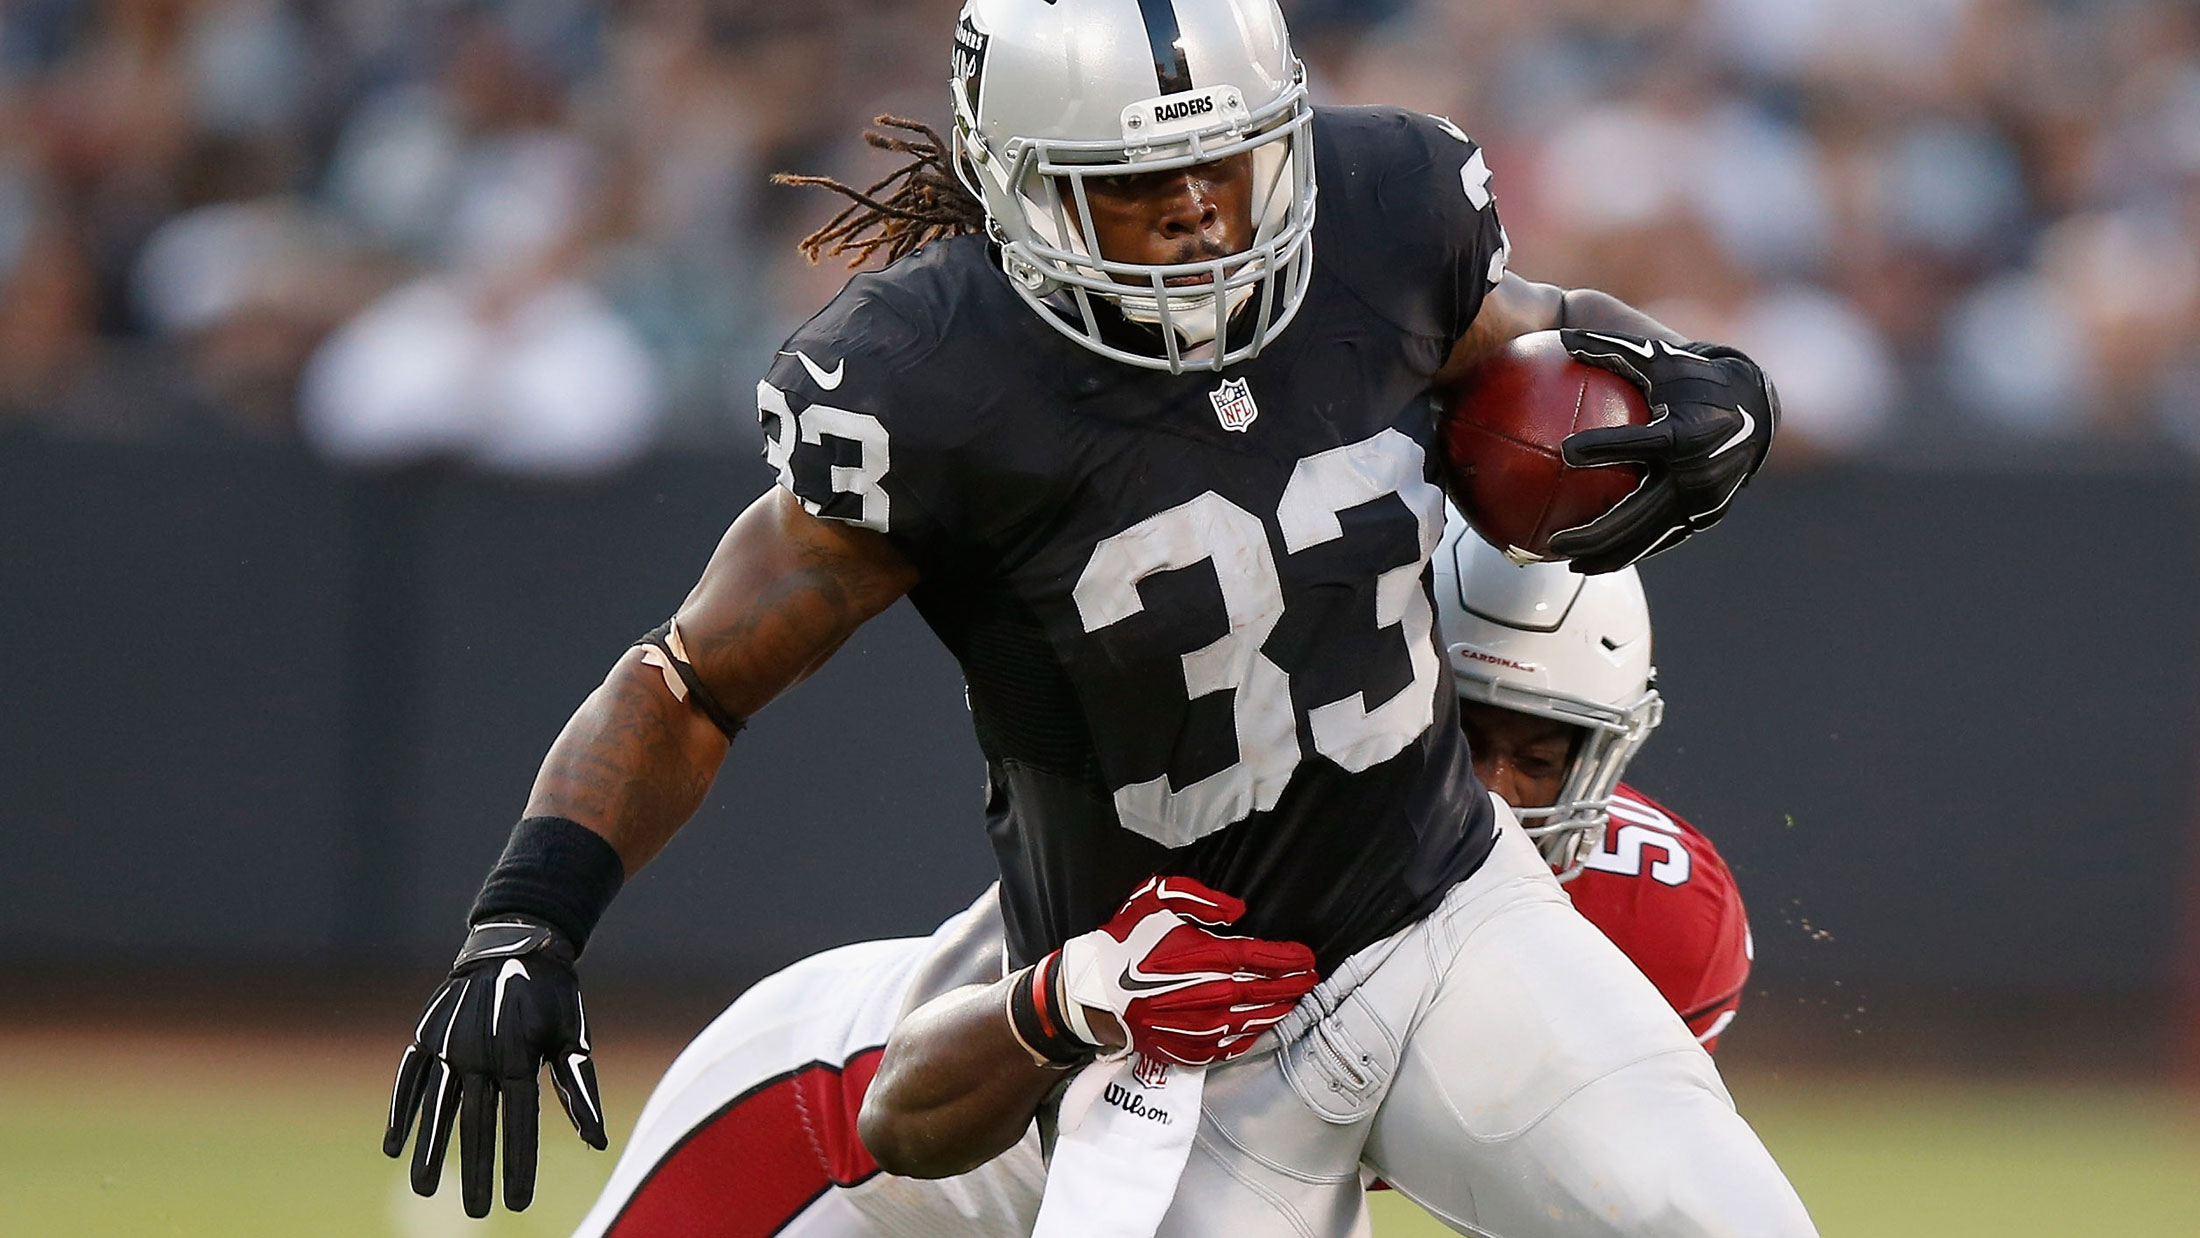 Trent Richardson #33 of the Oakland Raiders is tackled by Gabe Martin #50 of the Arizona Cardinals at O.co Coliseum on August 30, 2015 in Oakland, California.
